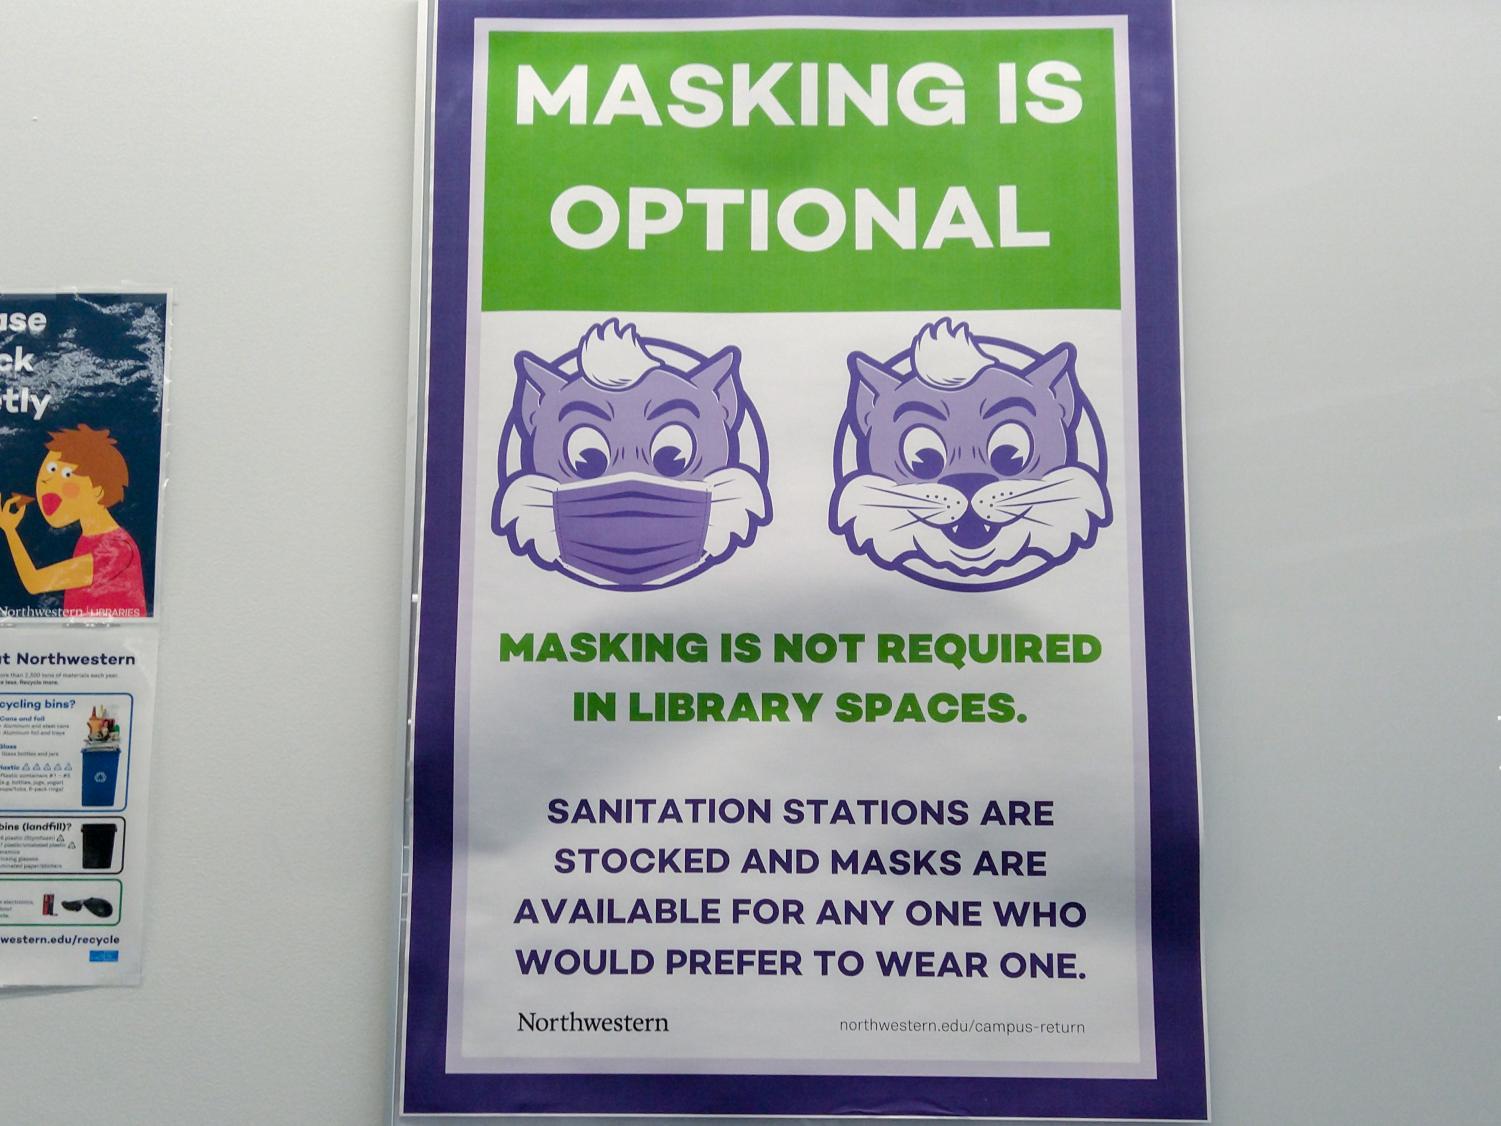 Poster+with+%E2%80%9Cmasking+is+optional%E2%80%9D+in+big+white+capital+letters+in+front+of+a+green+rectangle.+Depicted+below+are+two+wildcats%2C+one+with+a+mask%2C+the+other+without.+Below+these+cats+are+more+words.